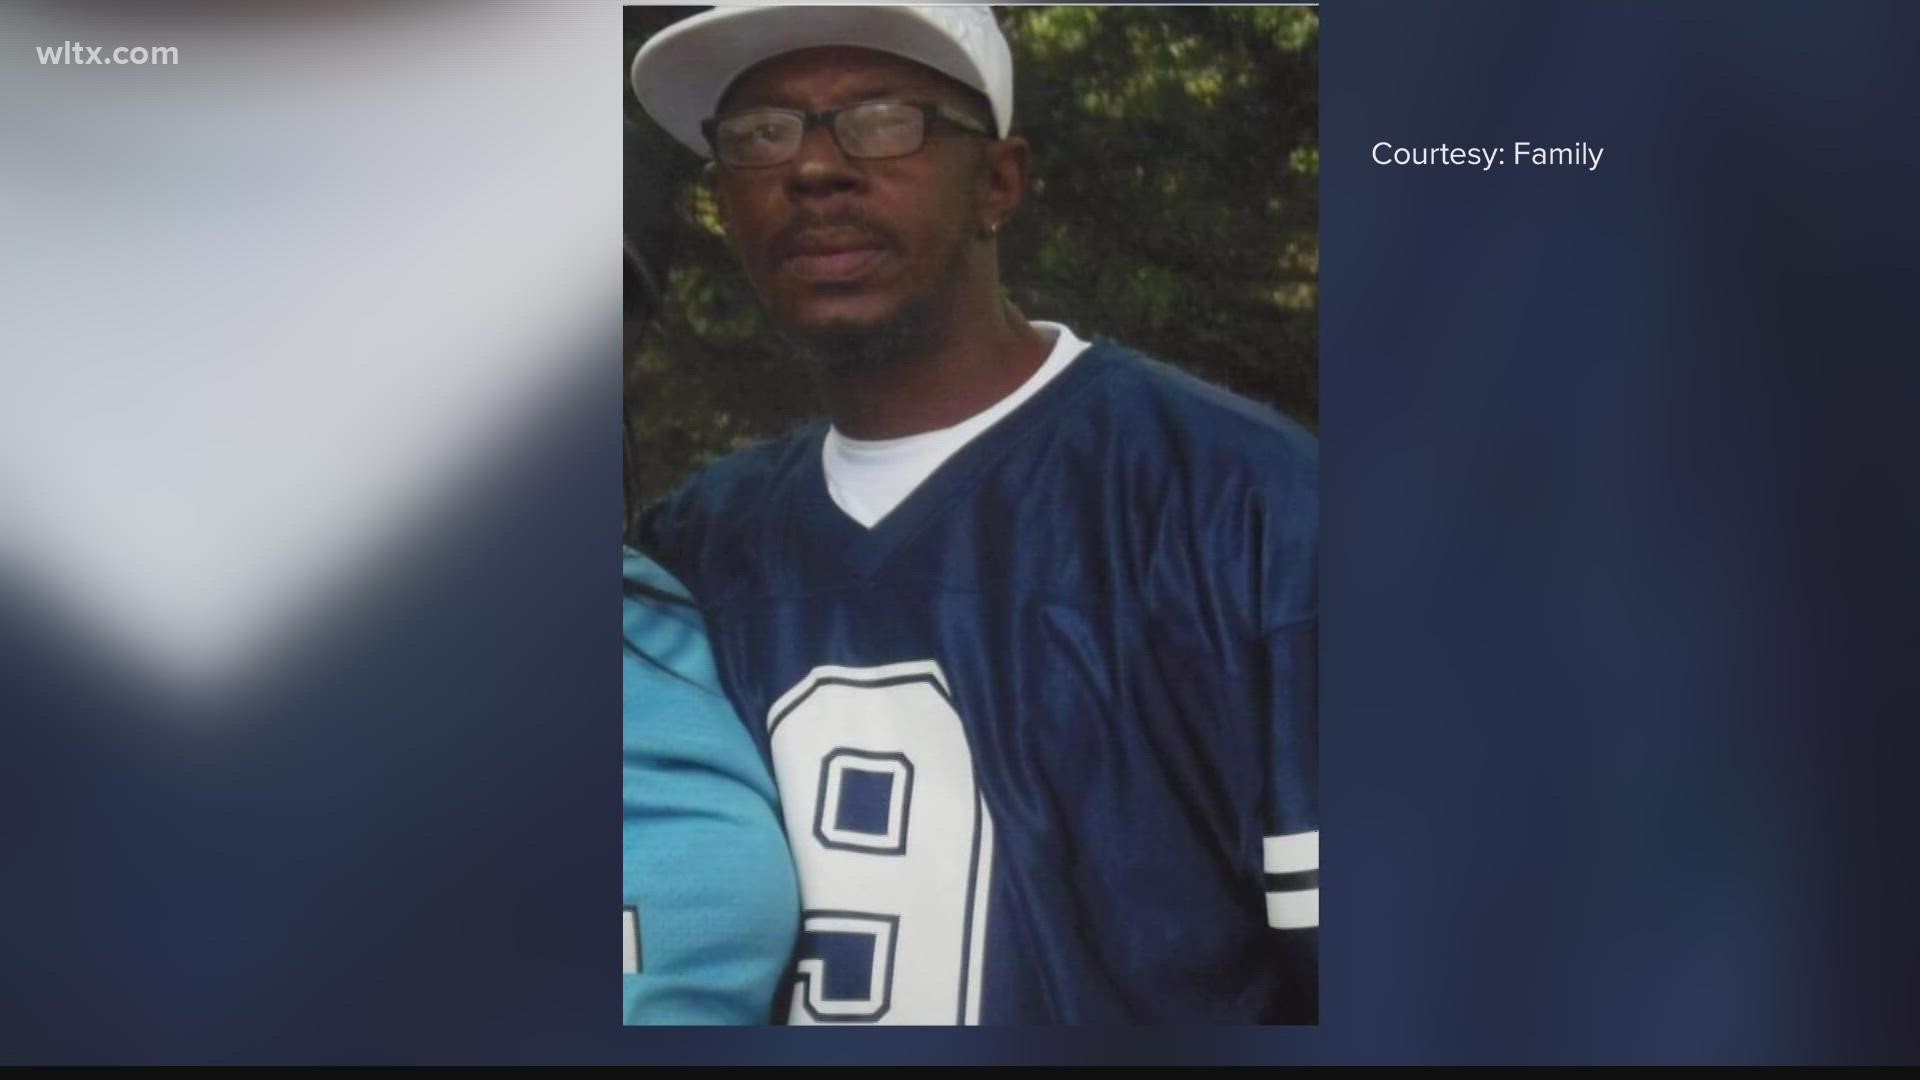 49-year-old Aaron Lucas was last known to be at the Greyhound bus station in Atlanta on or around Friday, July 22.